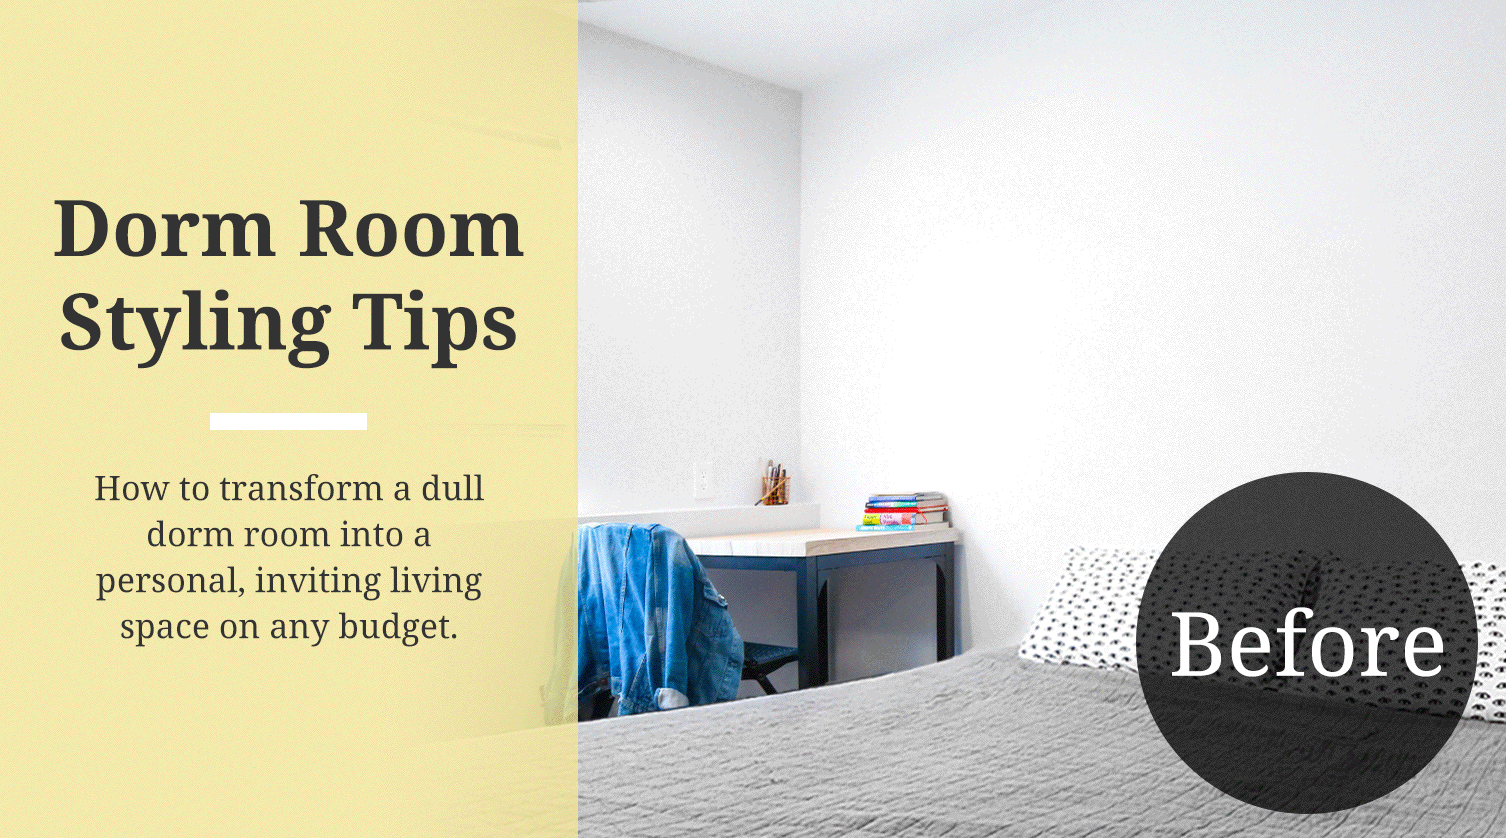 Dorm Room Styling Tips: How to transform a dull dorm room into a personal, inviting living space on any budget. 